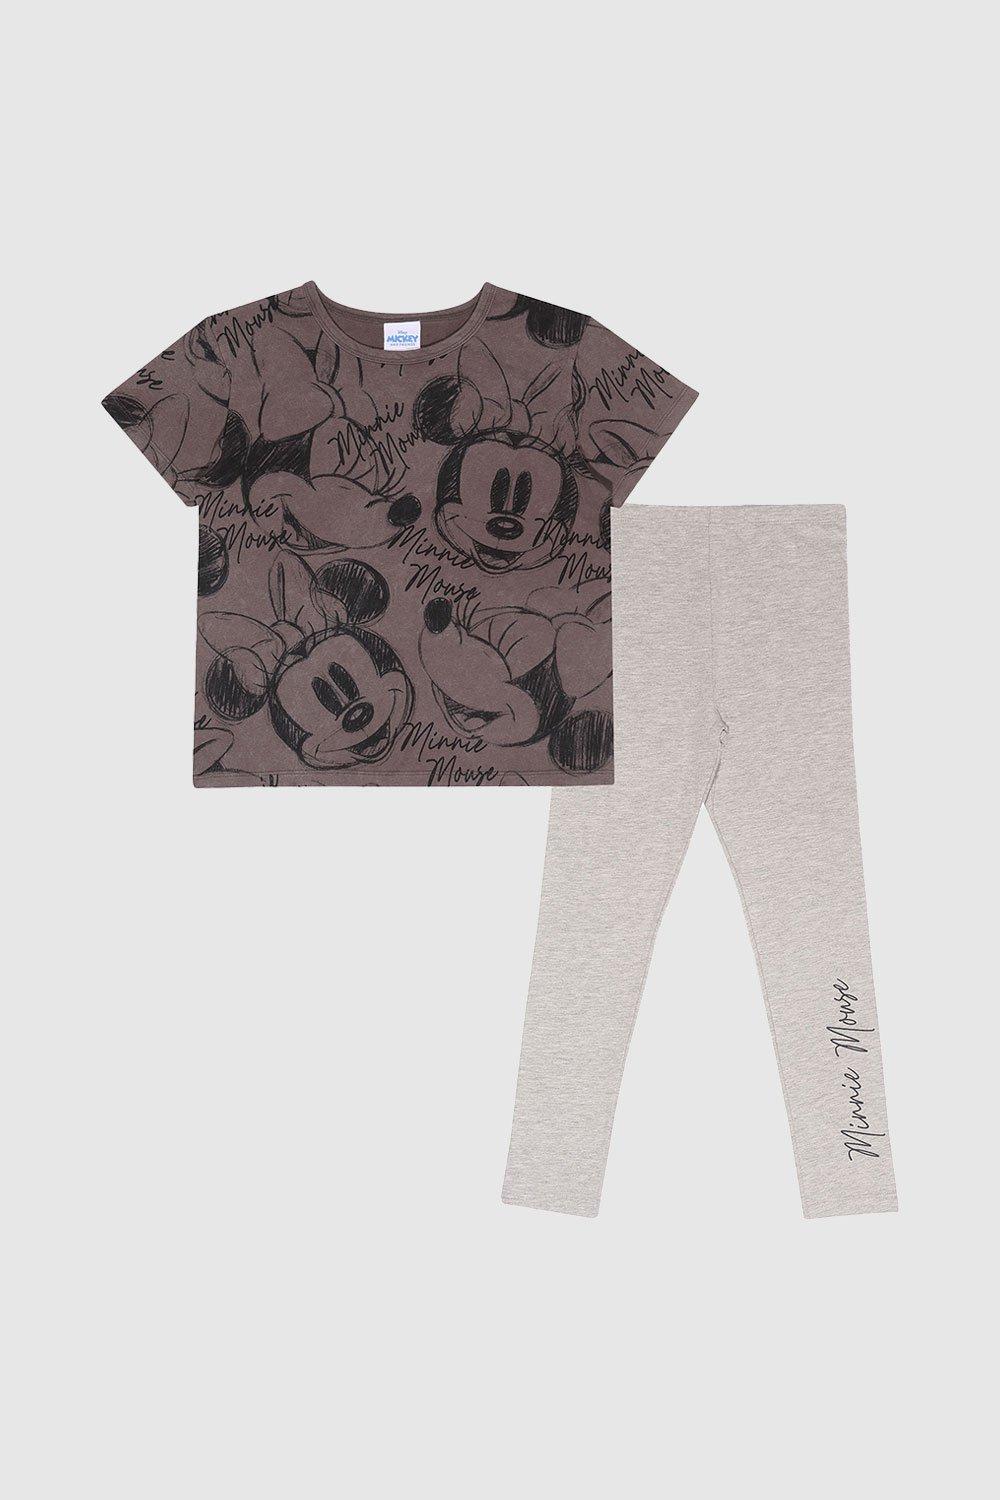 Sketches Minnie Mouse T-Shirt